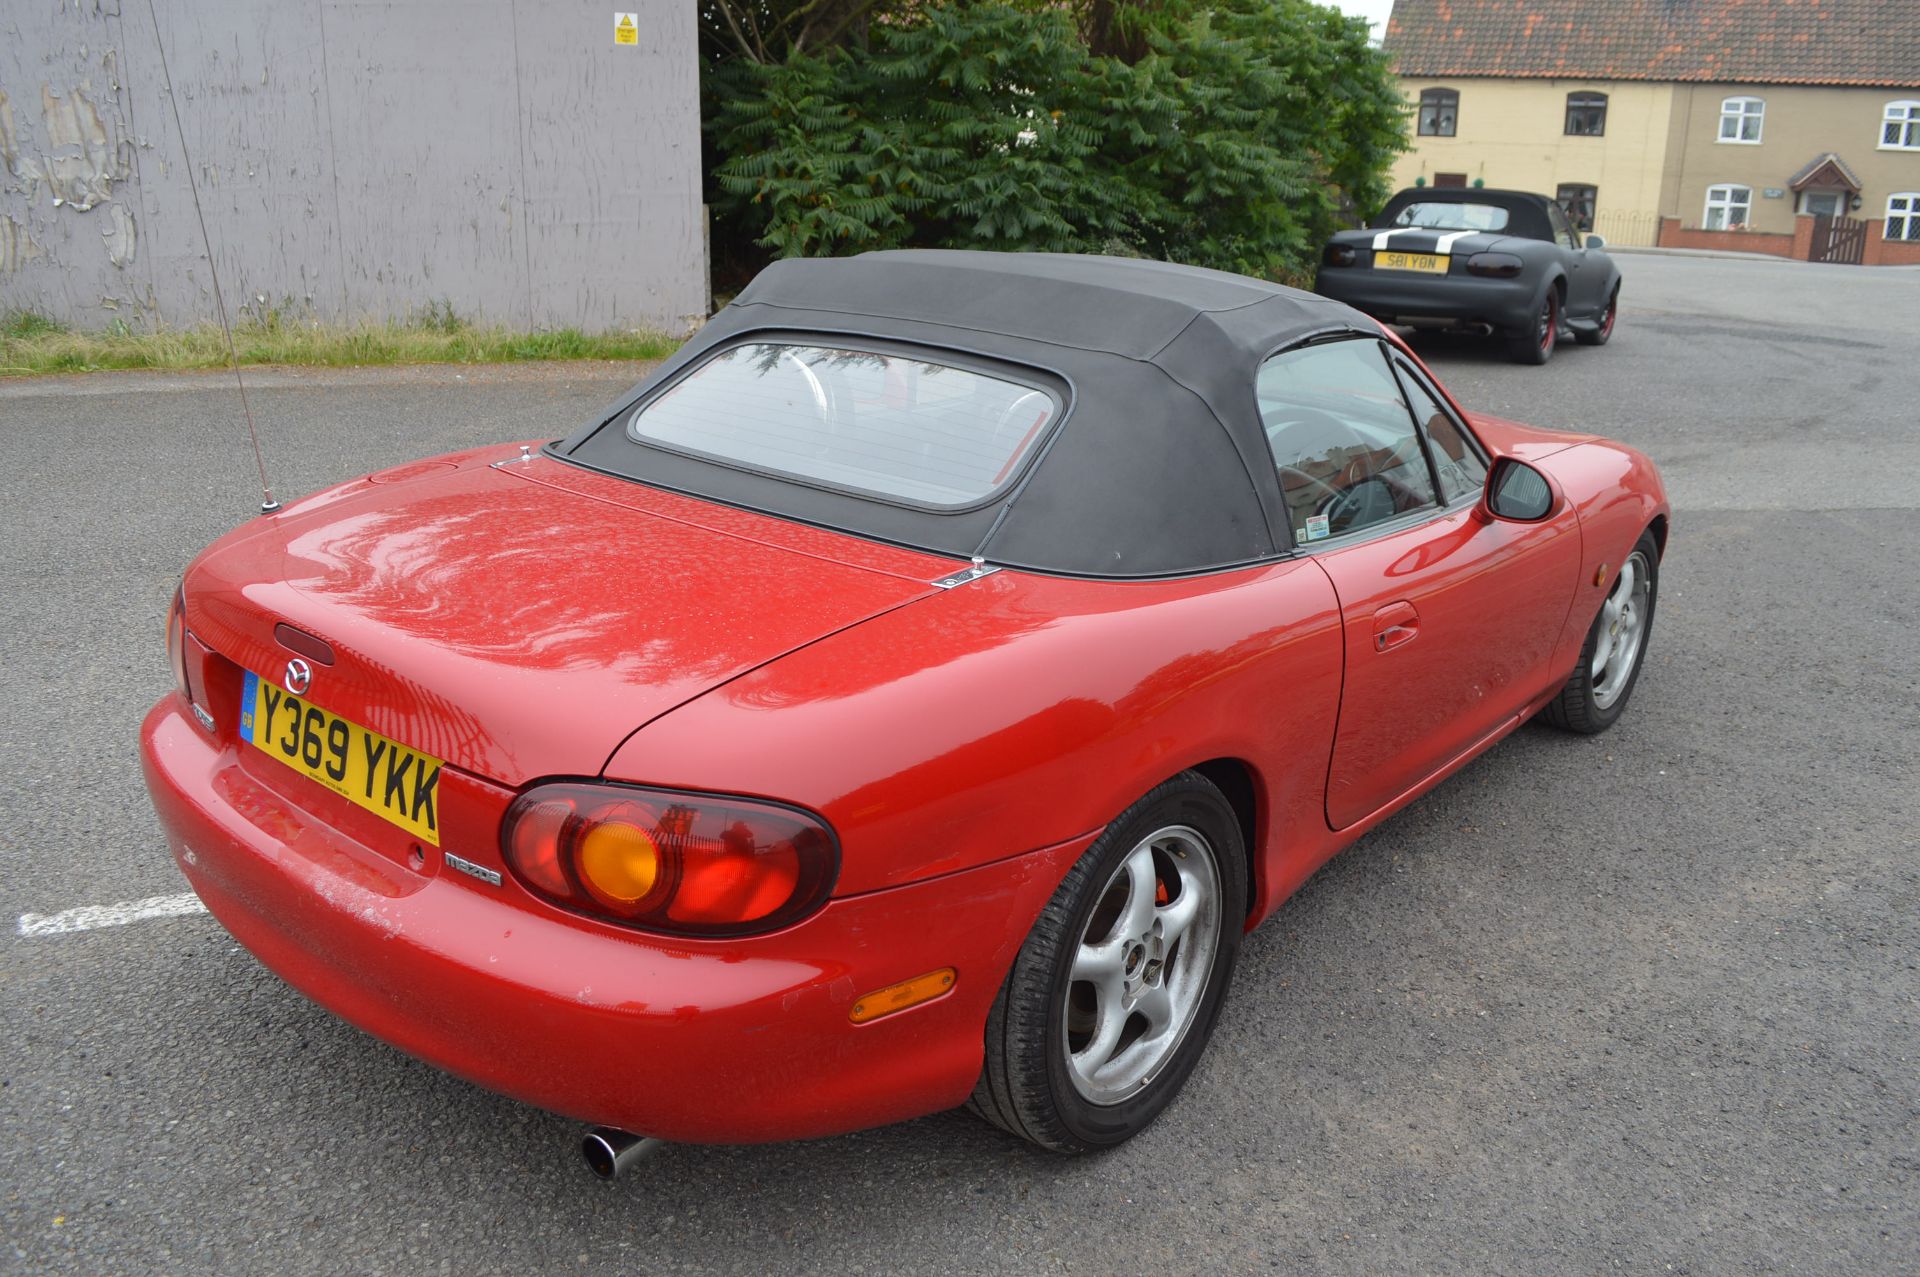 2001/Y REG MAZDA MX-5 1.81 CONVERTIBLE, UPRATED SUSPENSION, BRAKES, INDUCTION ETC - Image 6 of 17